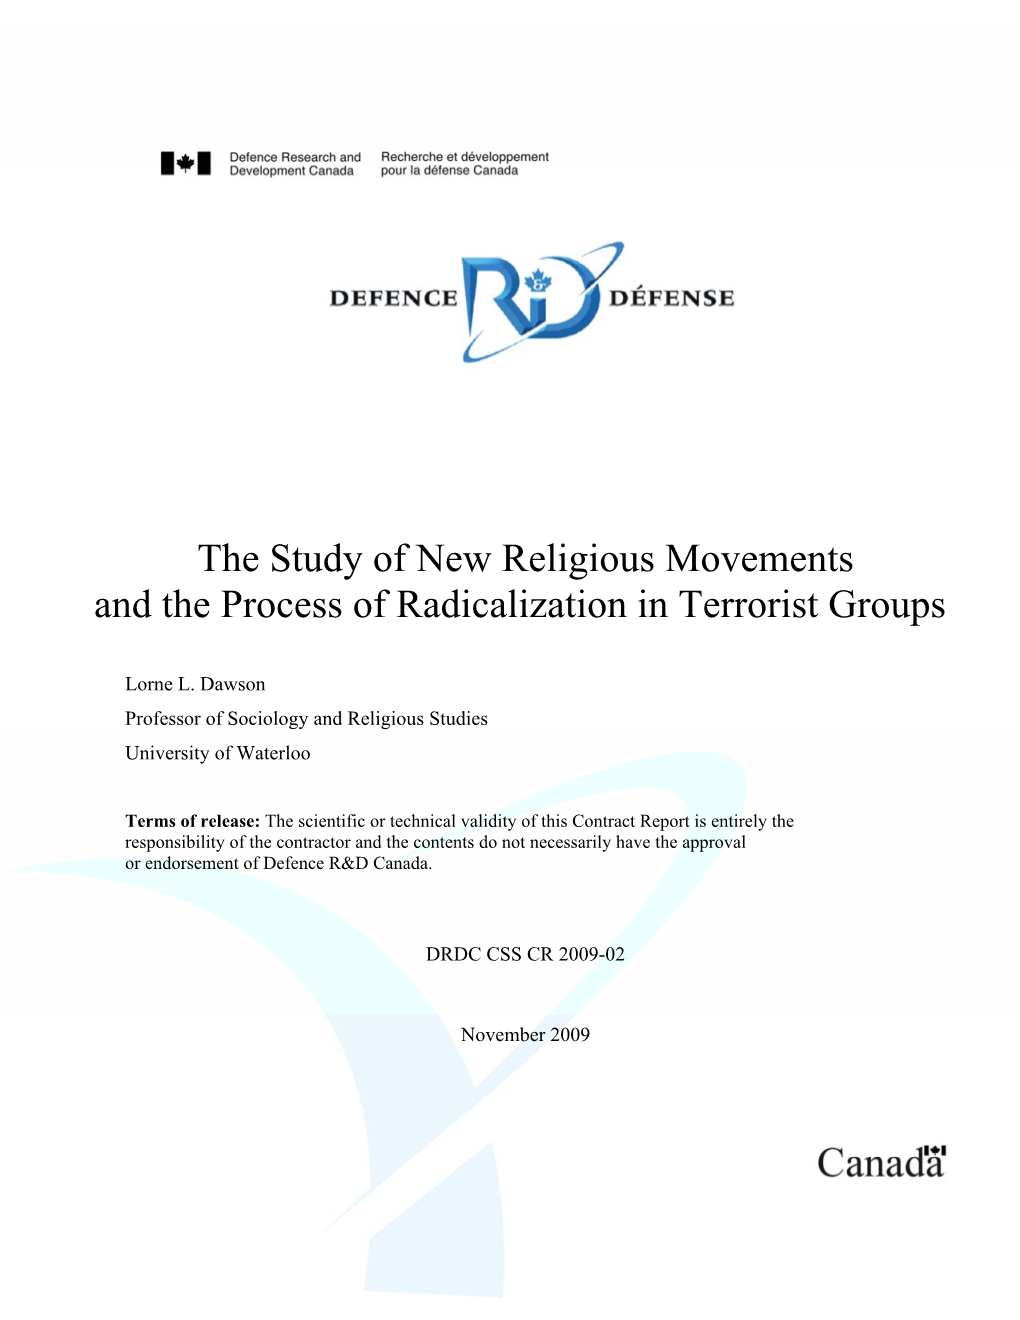 The Study of New Religious Movements and the Process of Radicalization in Terrorist Groups